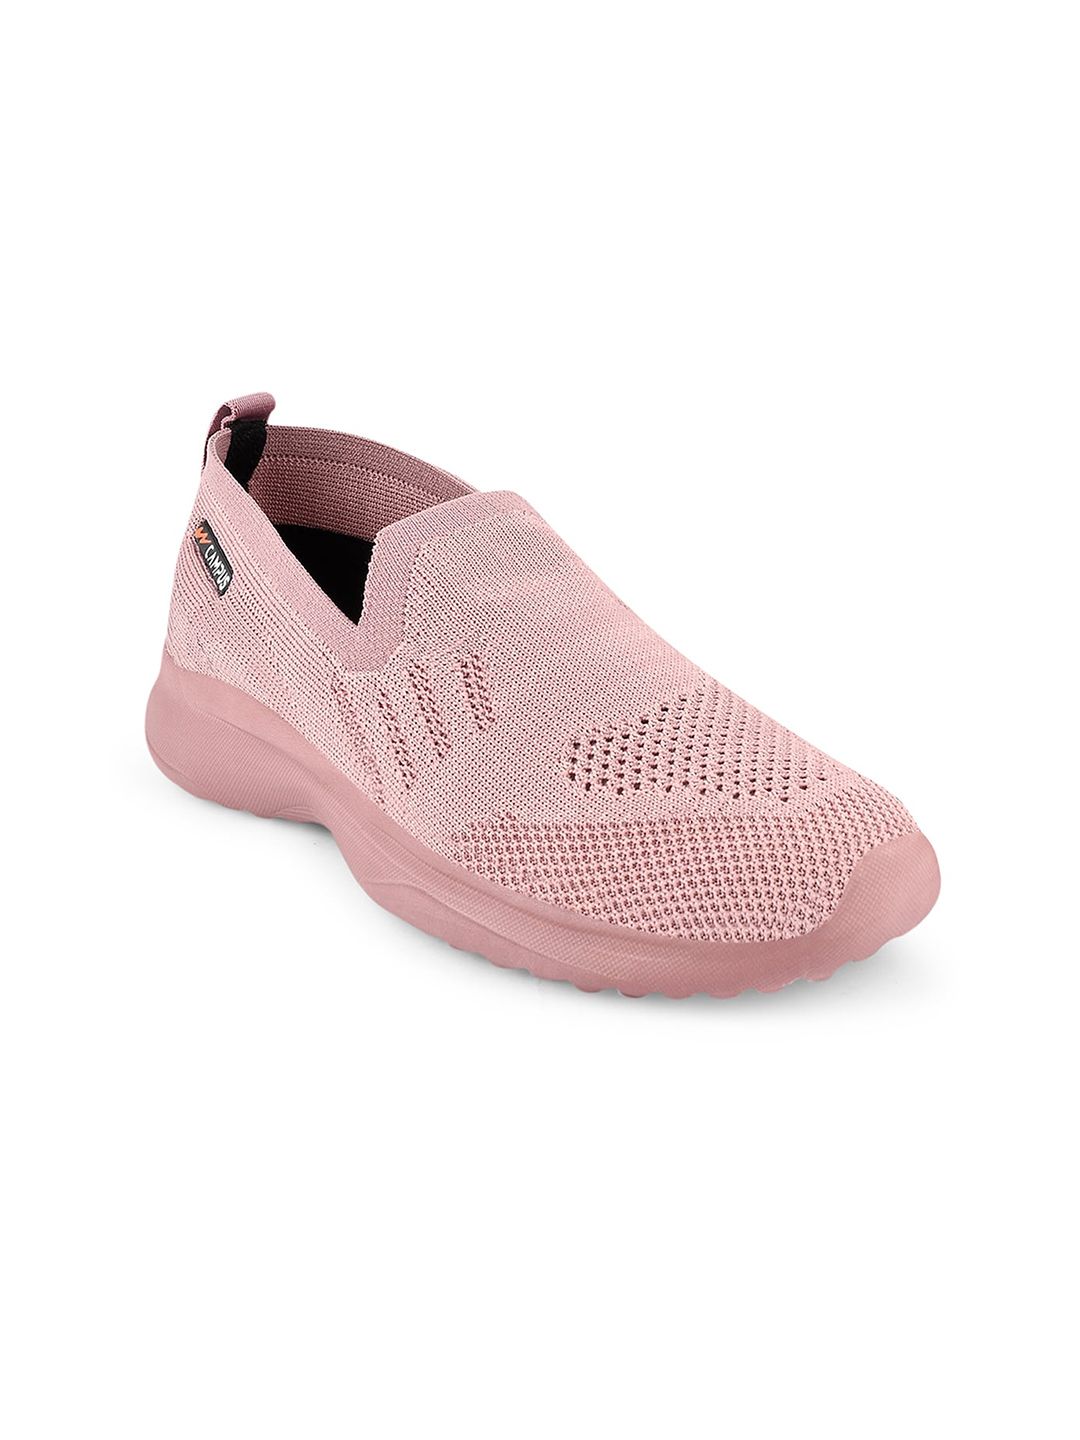 Campus Women Mesh Running Shoes Price in India